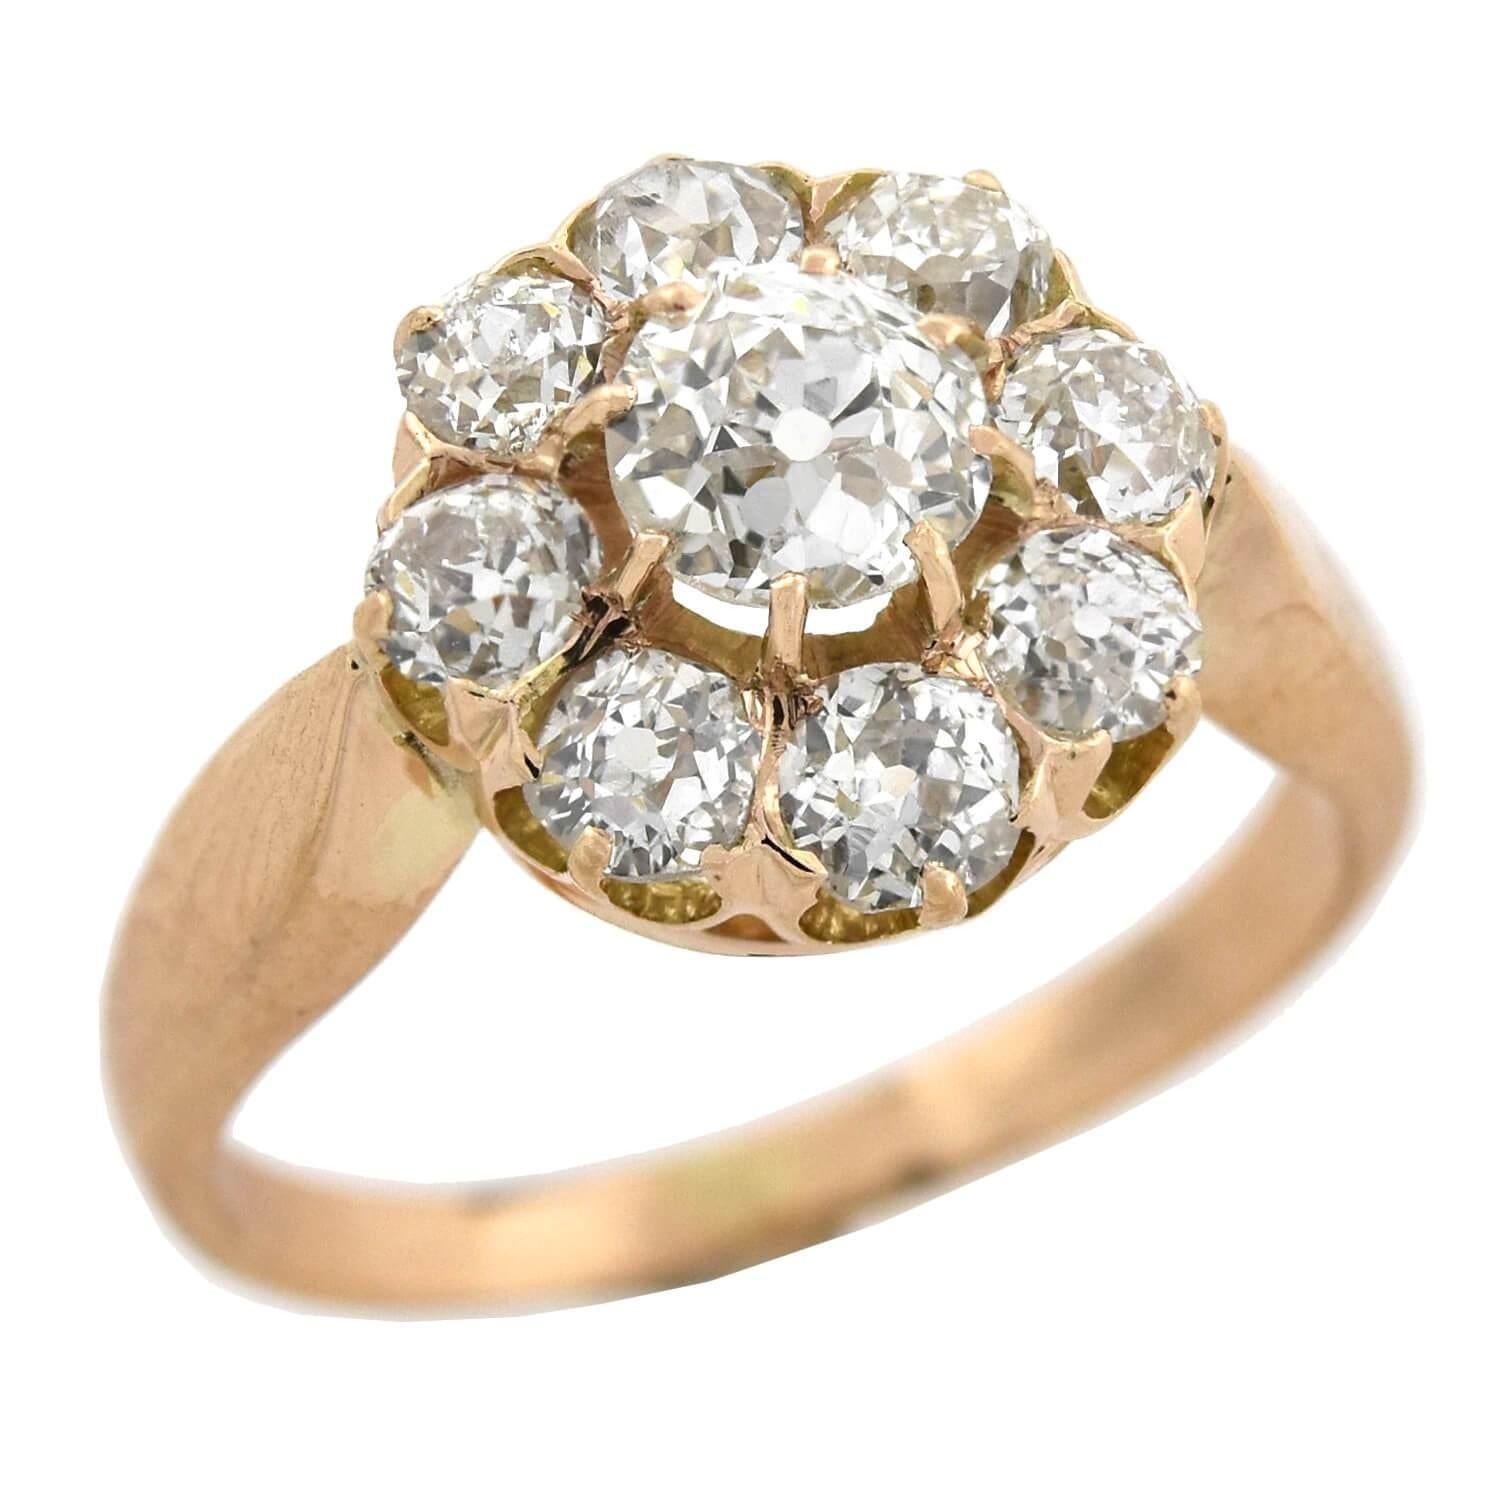 An exquisite diamond cluster ring from the Victorian (ca1880) era! This gorgeous piece is crafted in 18kt rose gold and adorns an approximately 0.45ct old Mine Cut diamond at the center of a sparkling border. The stone rests slightly above the 8